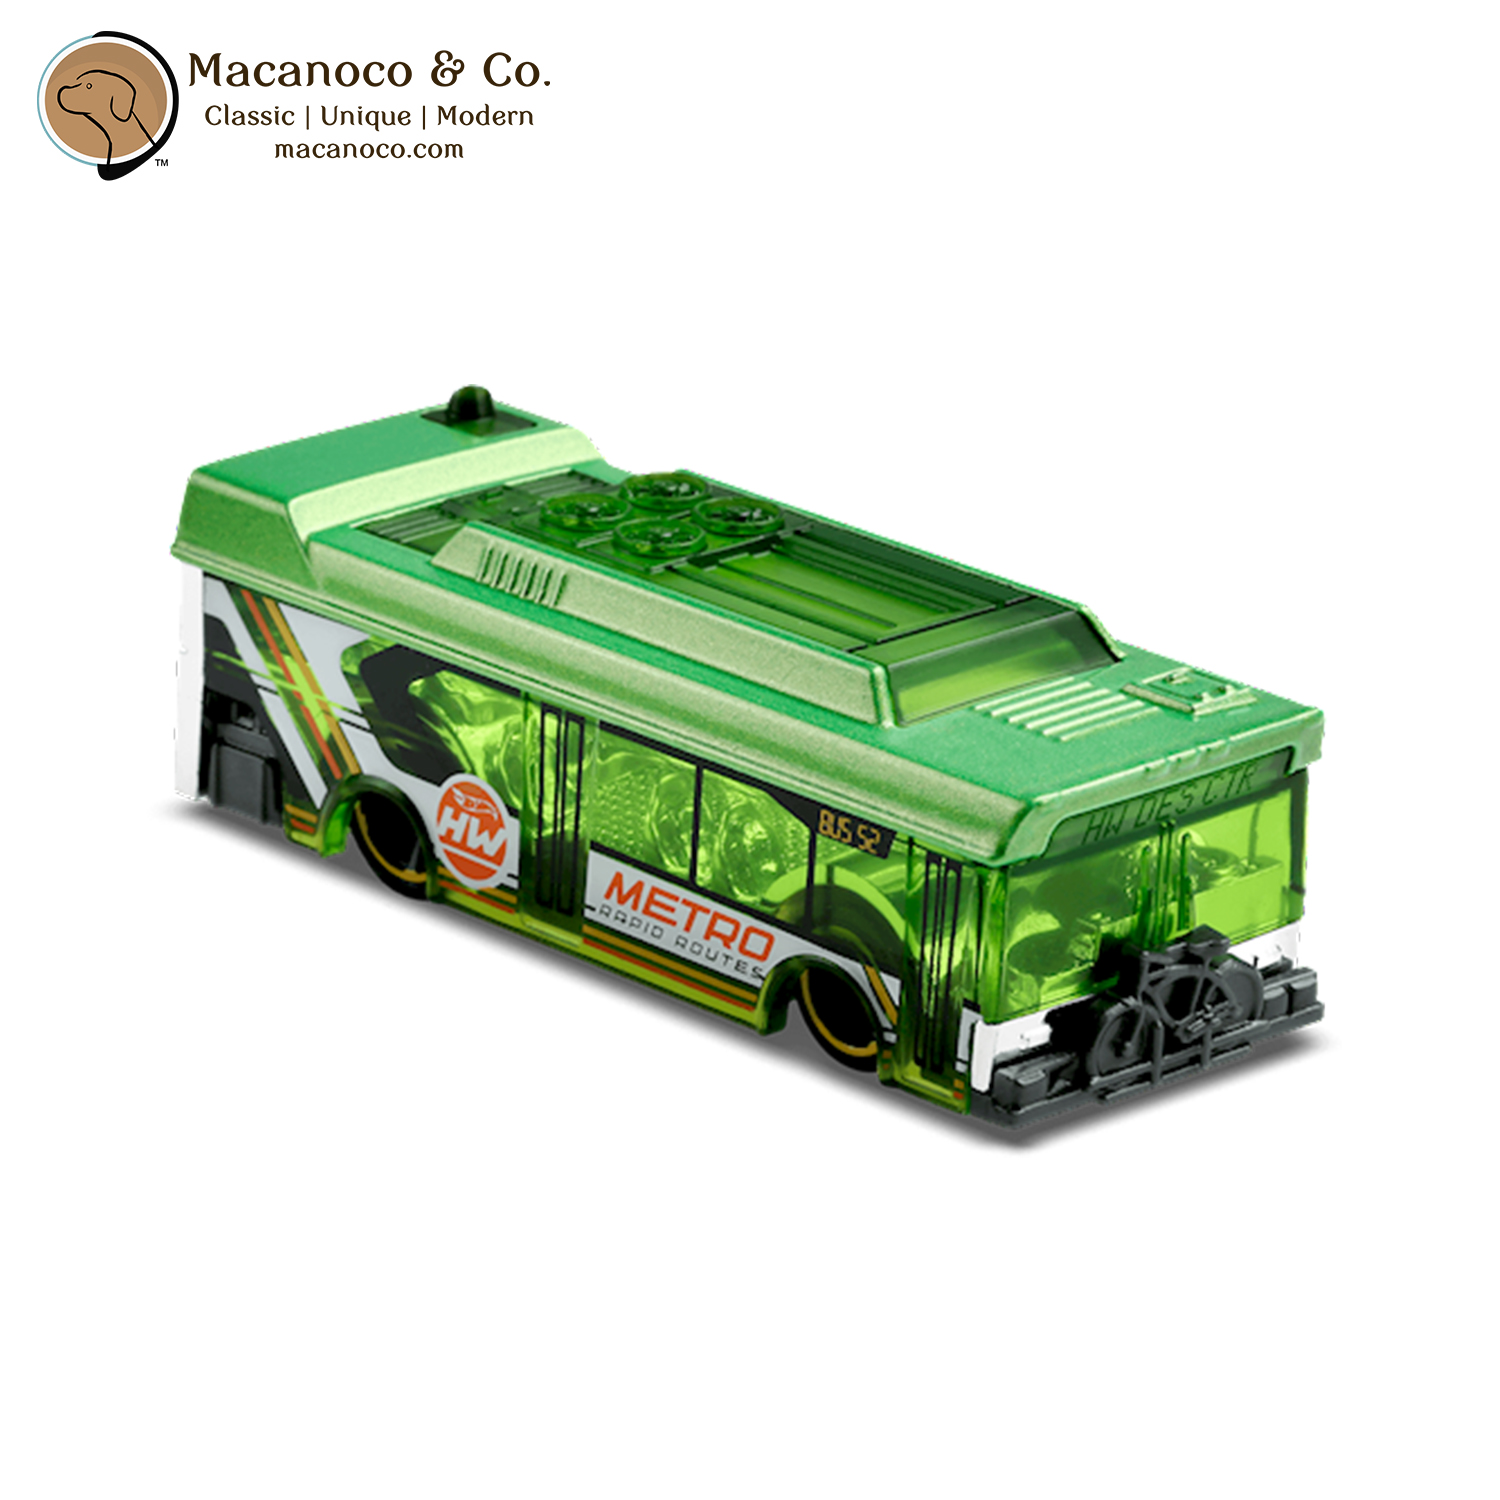 Hot Wheels HW Metro Ain't Fare, Green Toy - Macanoco and Co.